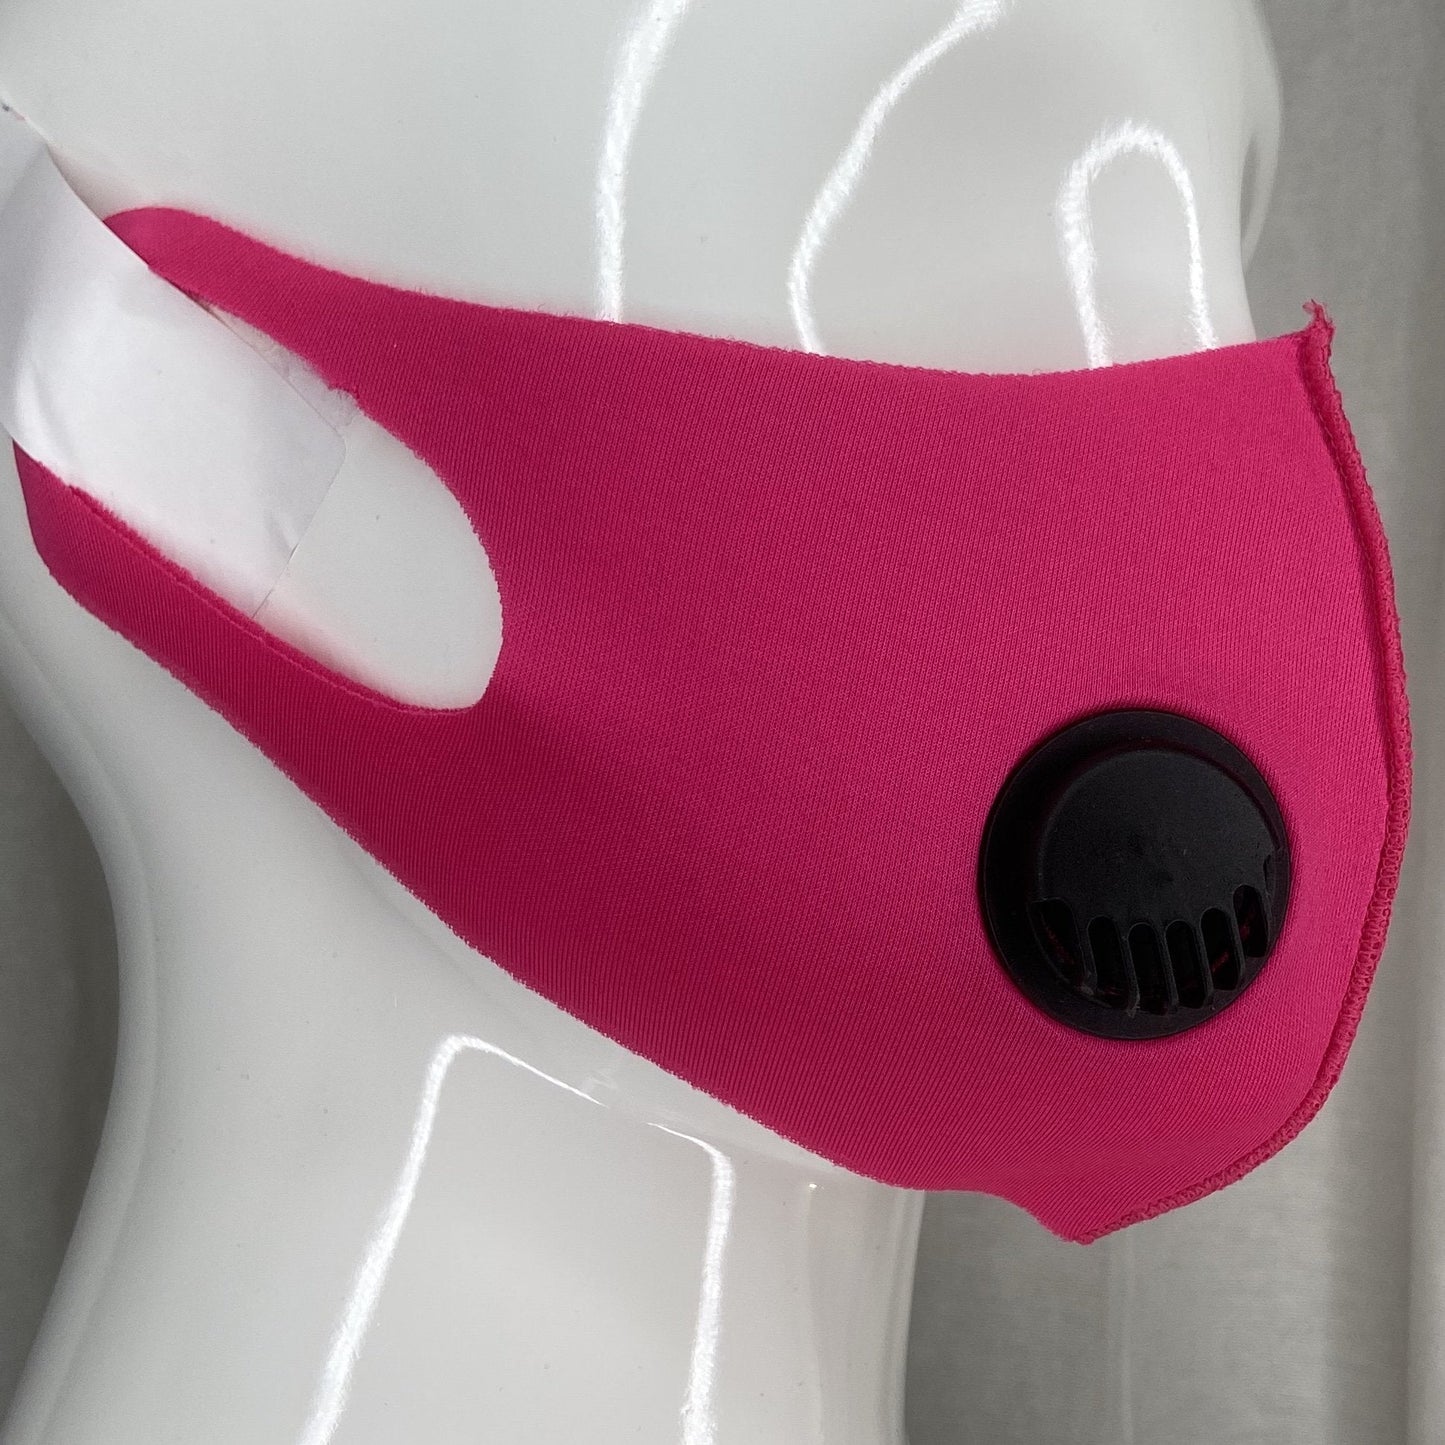 Respirator PM 2.5 Mask (Hot Pink) In Stock-Boughie Curves-Boughie